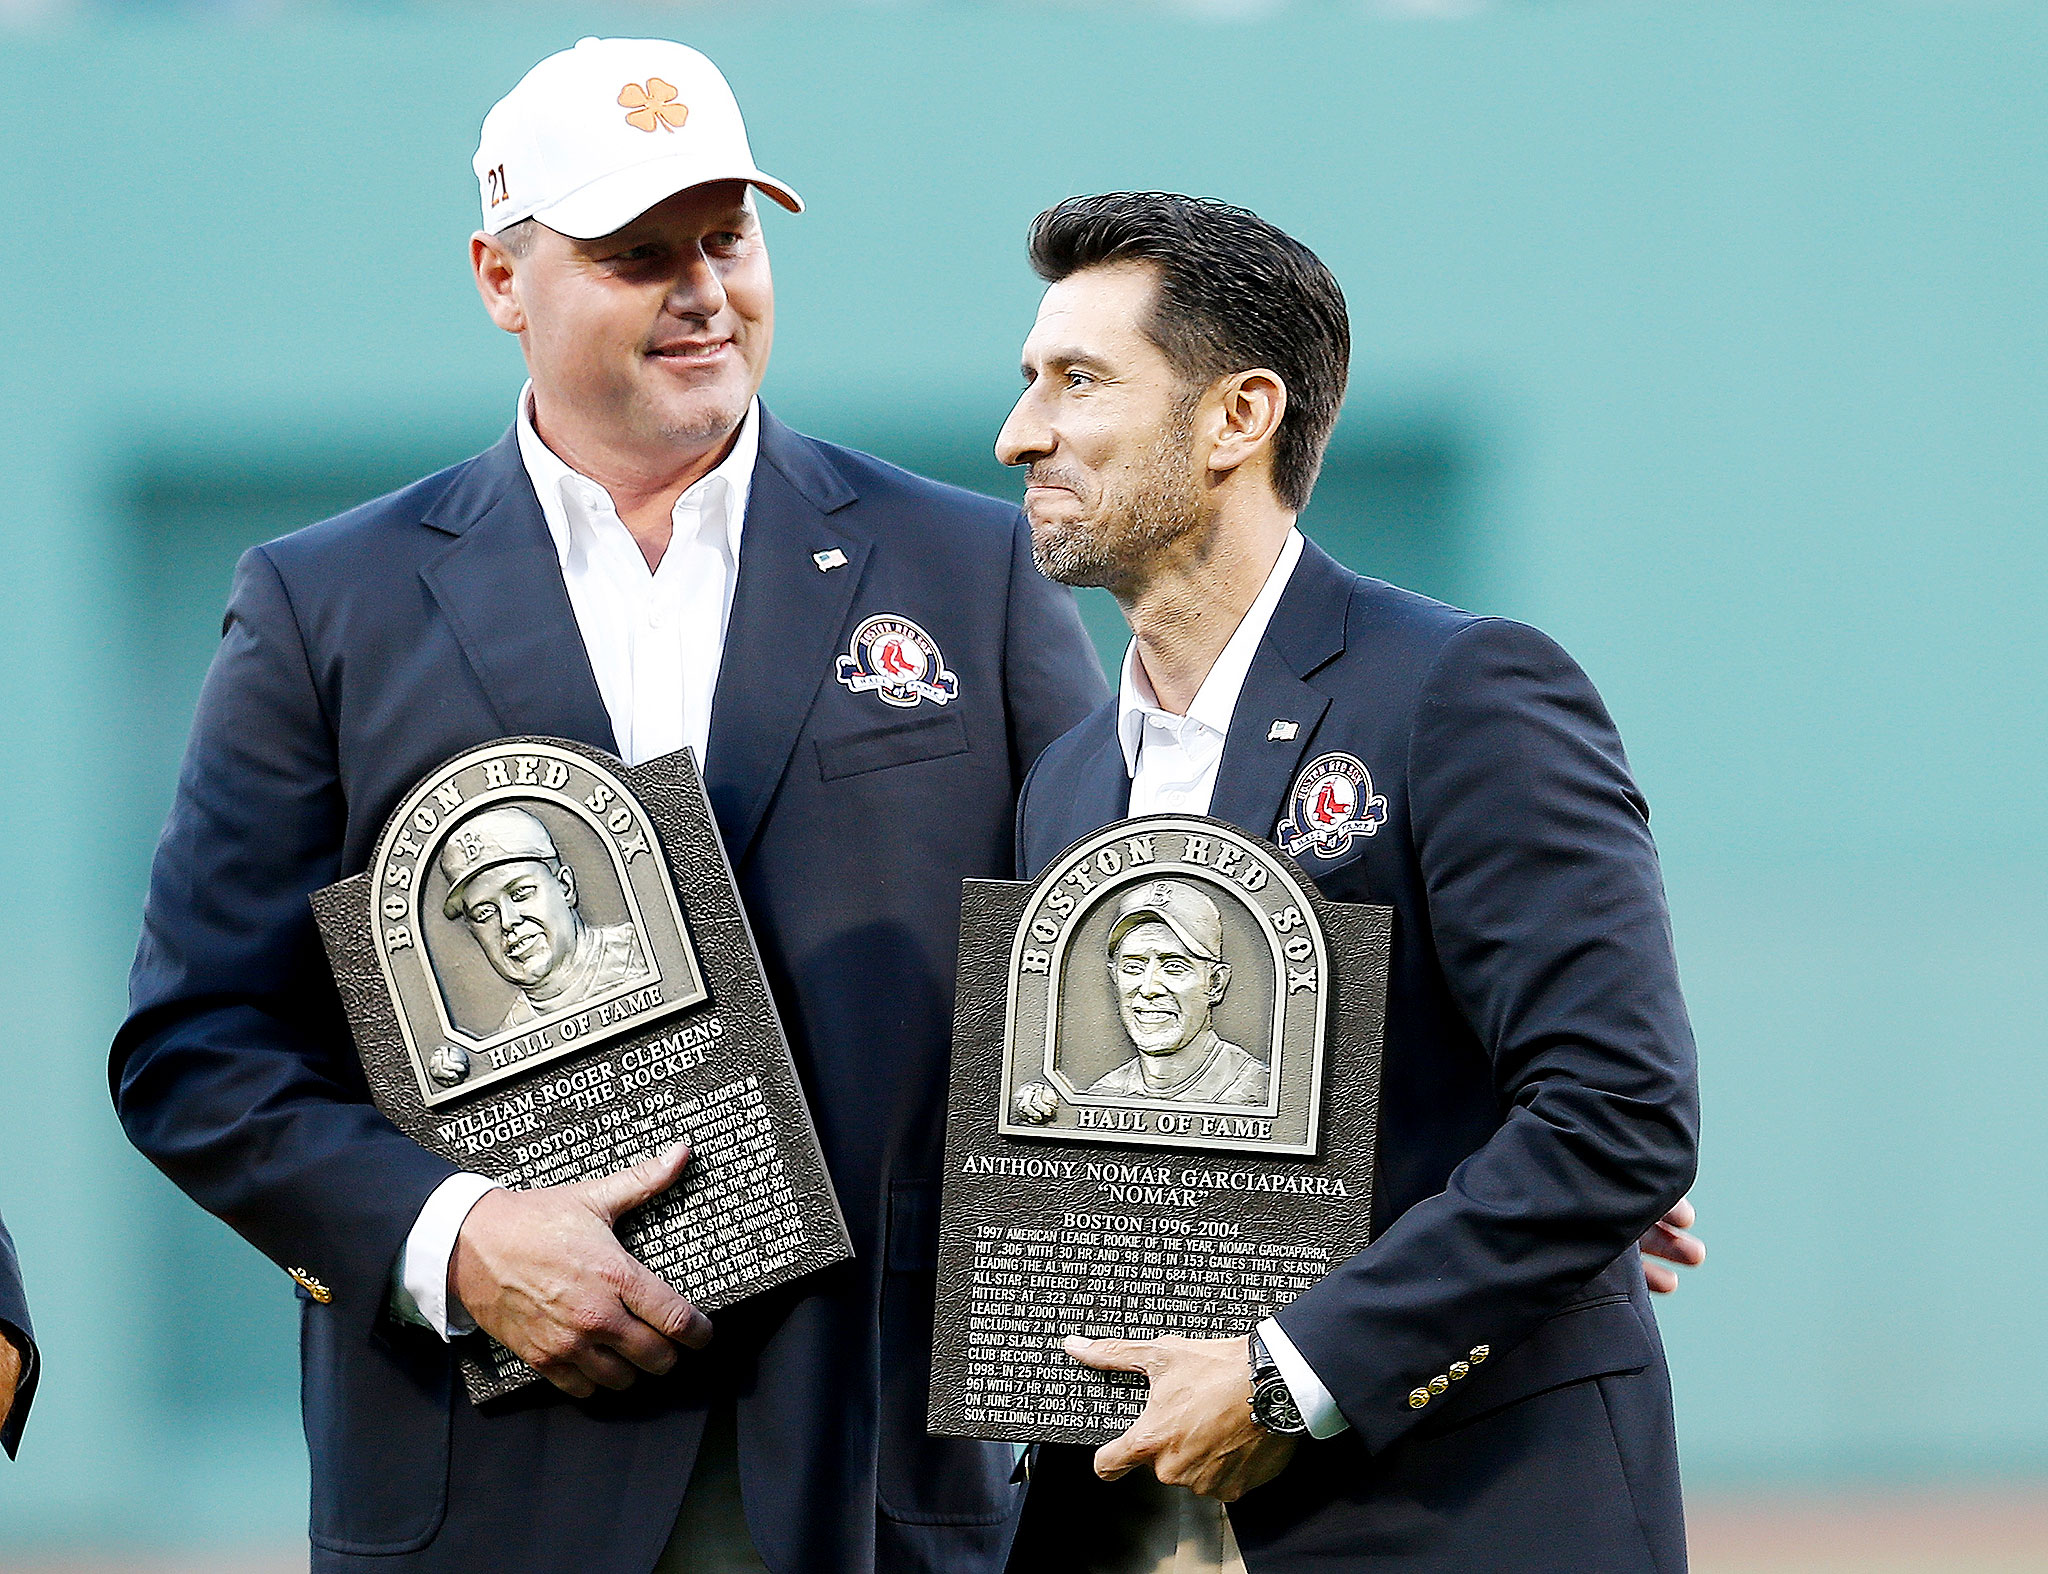 Clemens, Pedro, Nomar, Castiglione inducted into Red Sox Hall of Fame